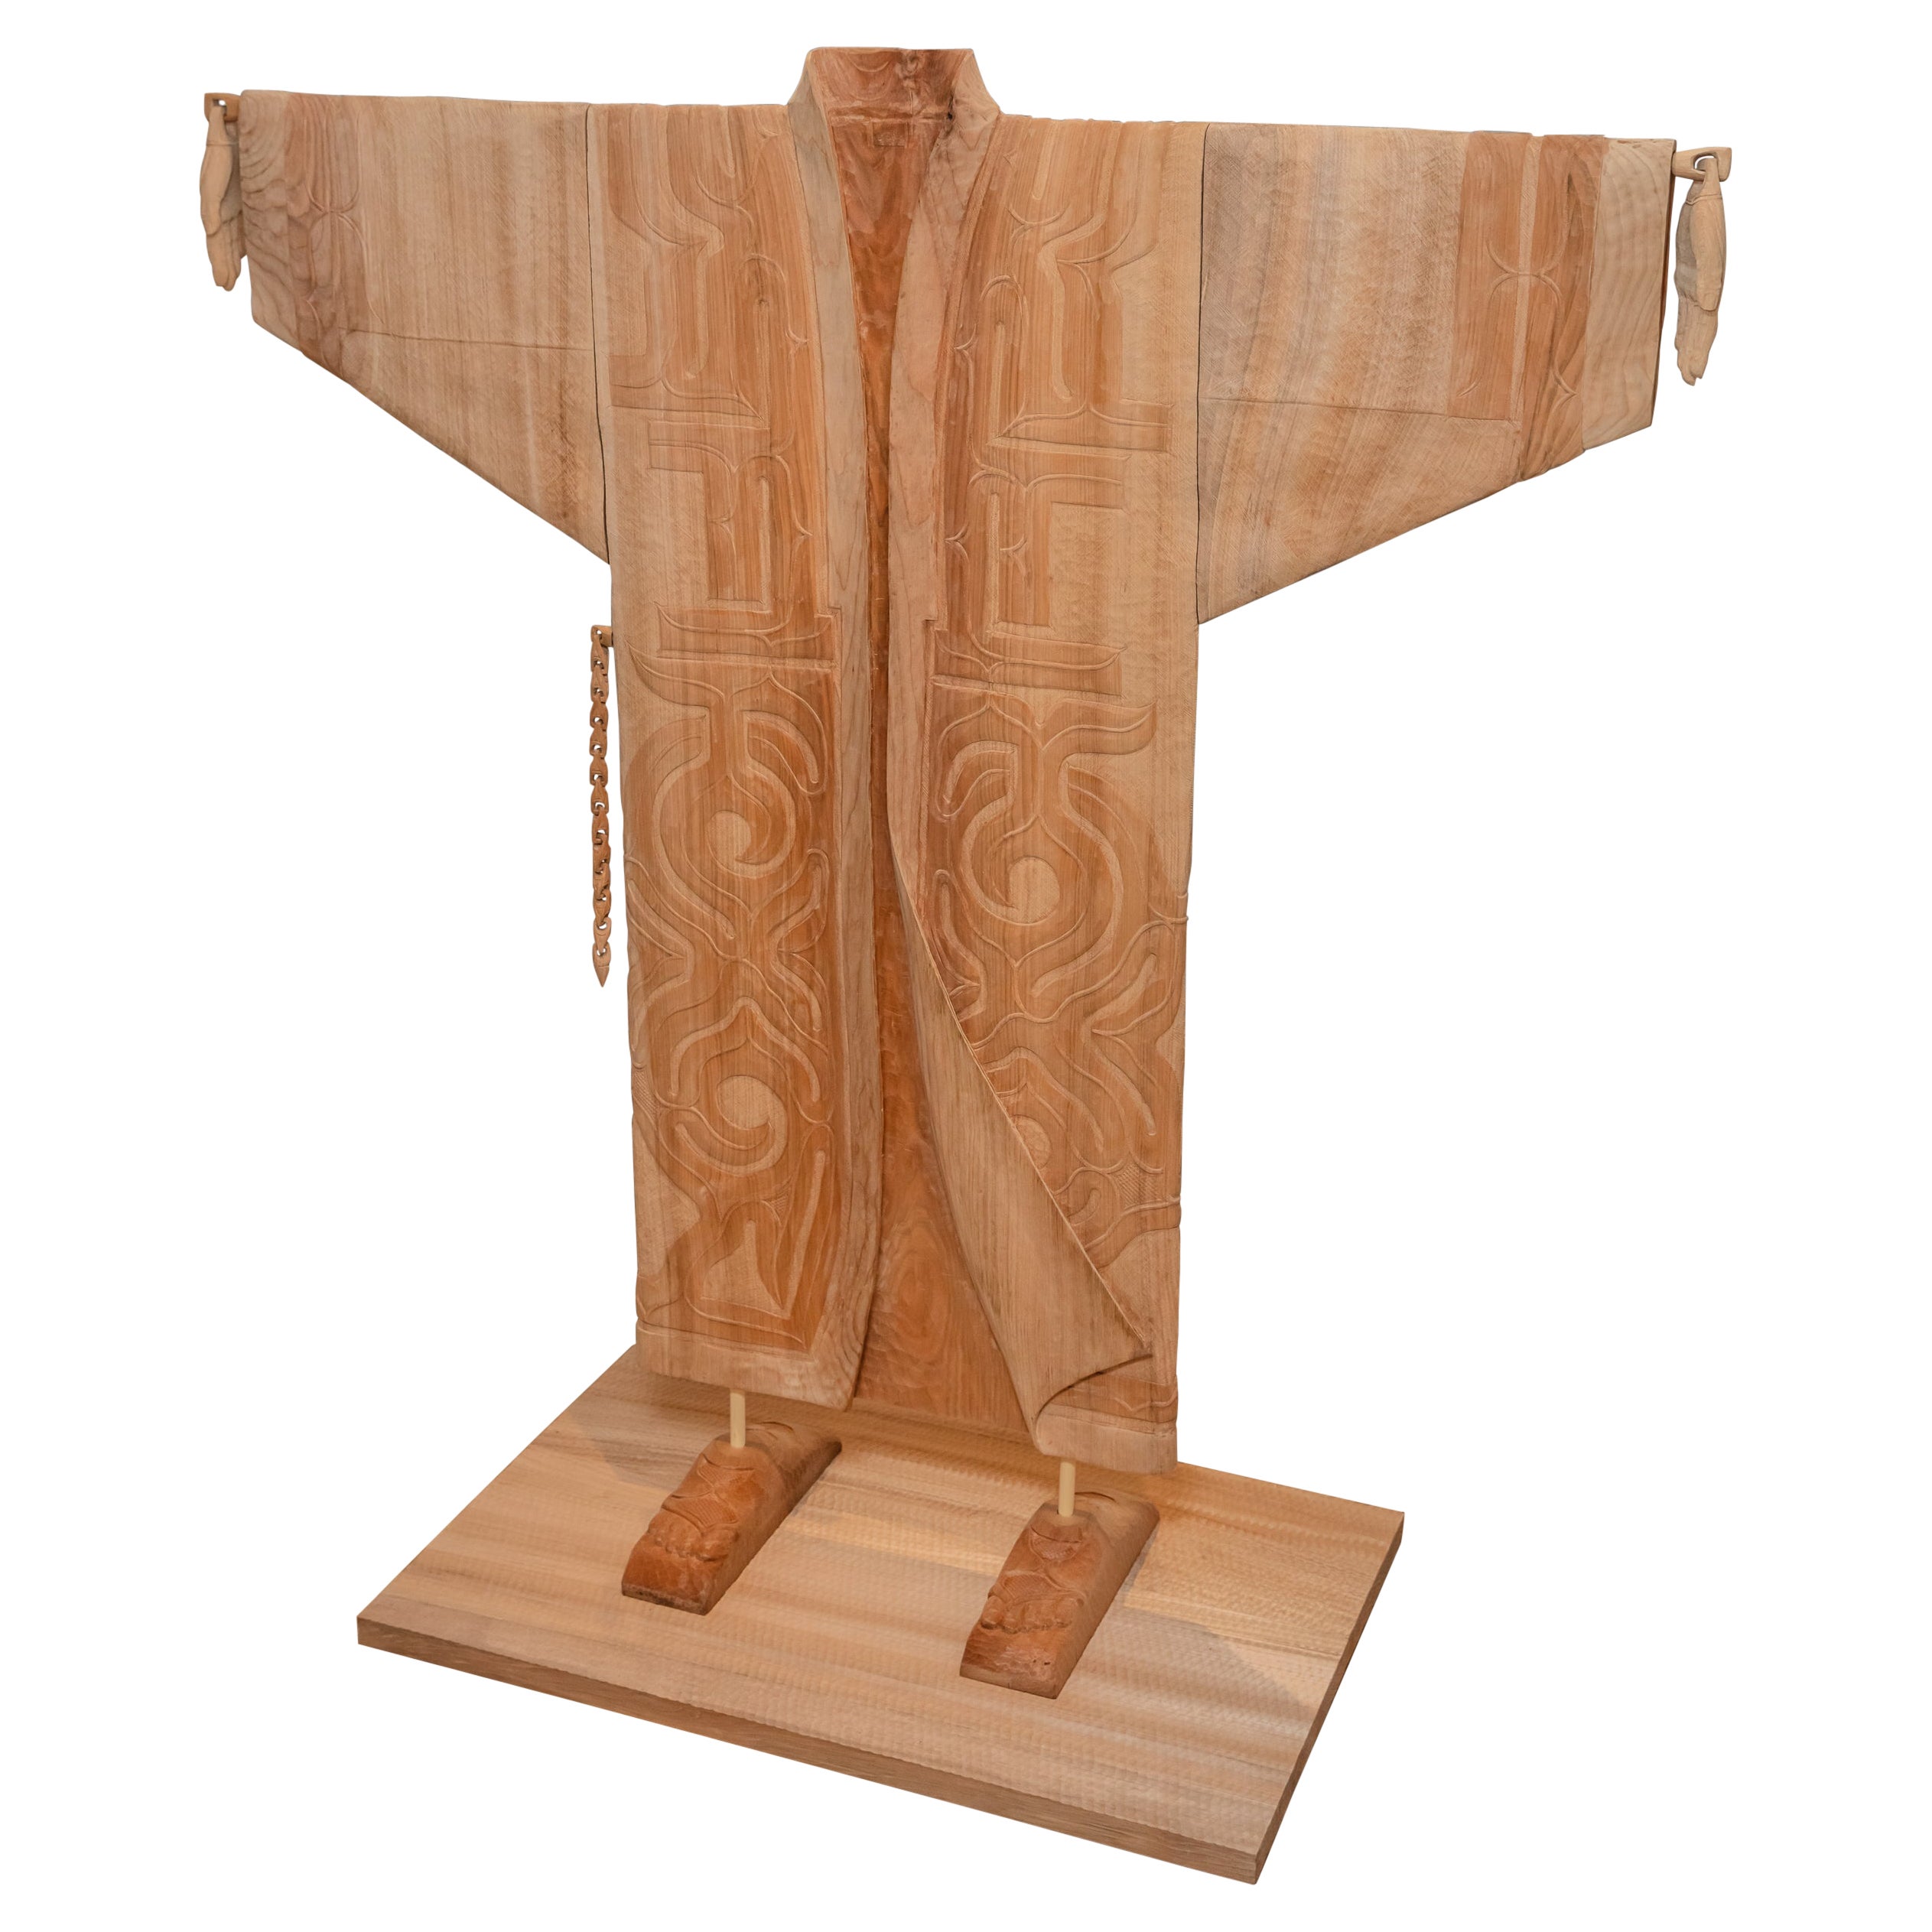 Contemporary Wooden Kimono Sculpture Carved in Japanese Elm by Toru Kaizawa